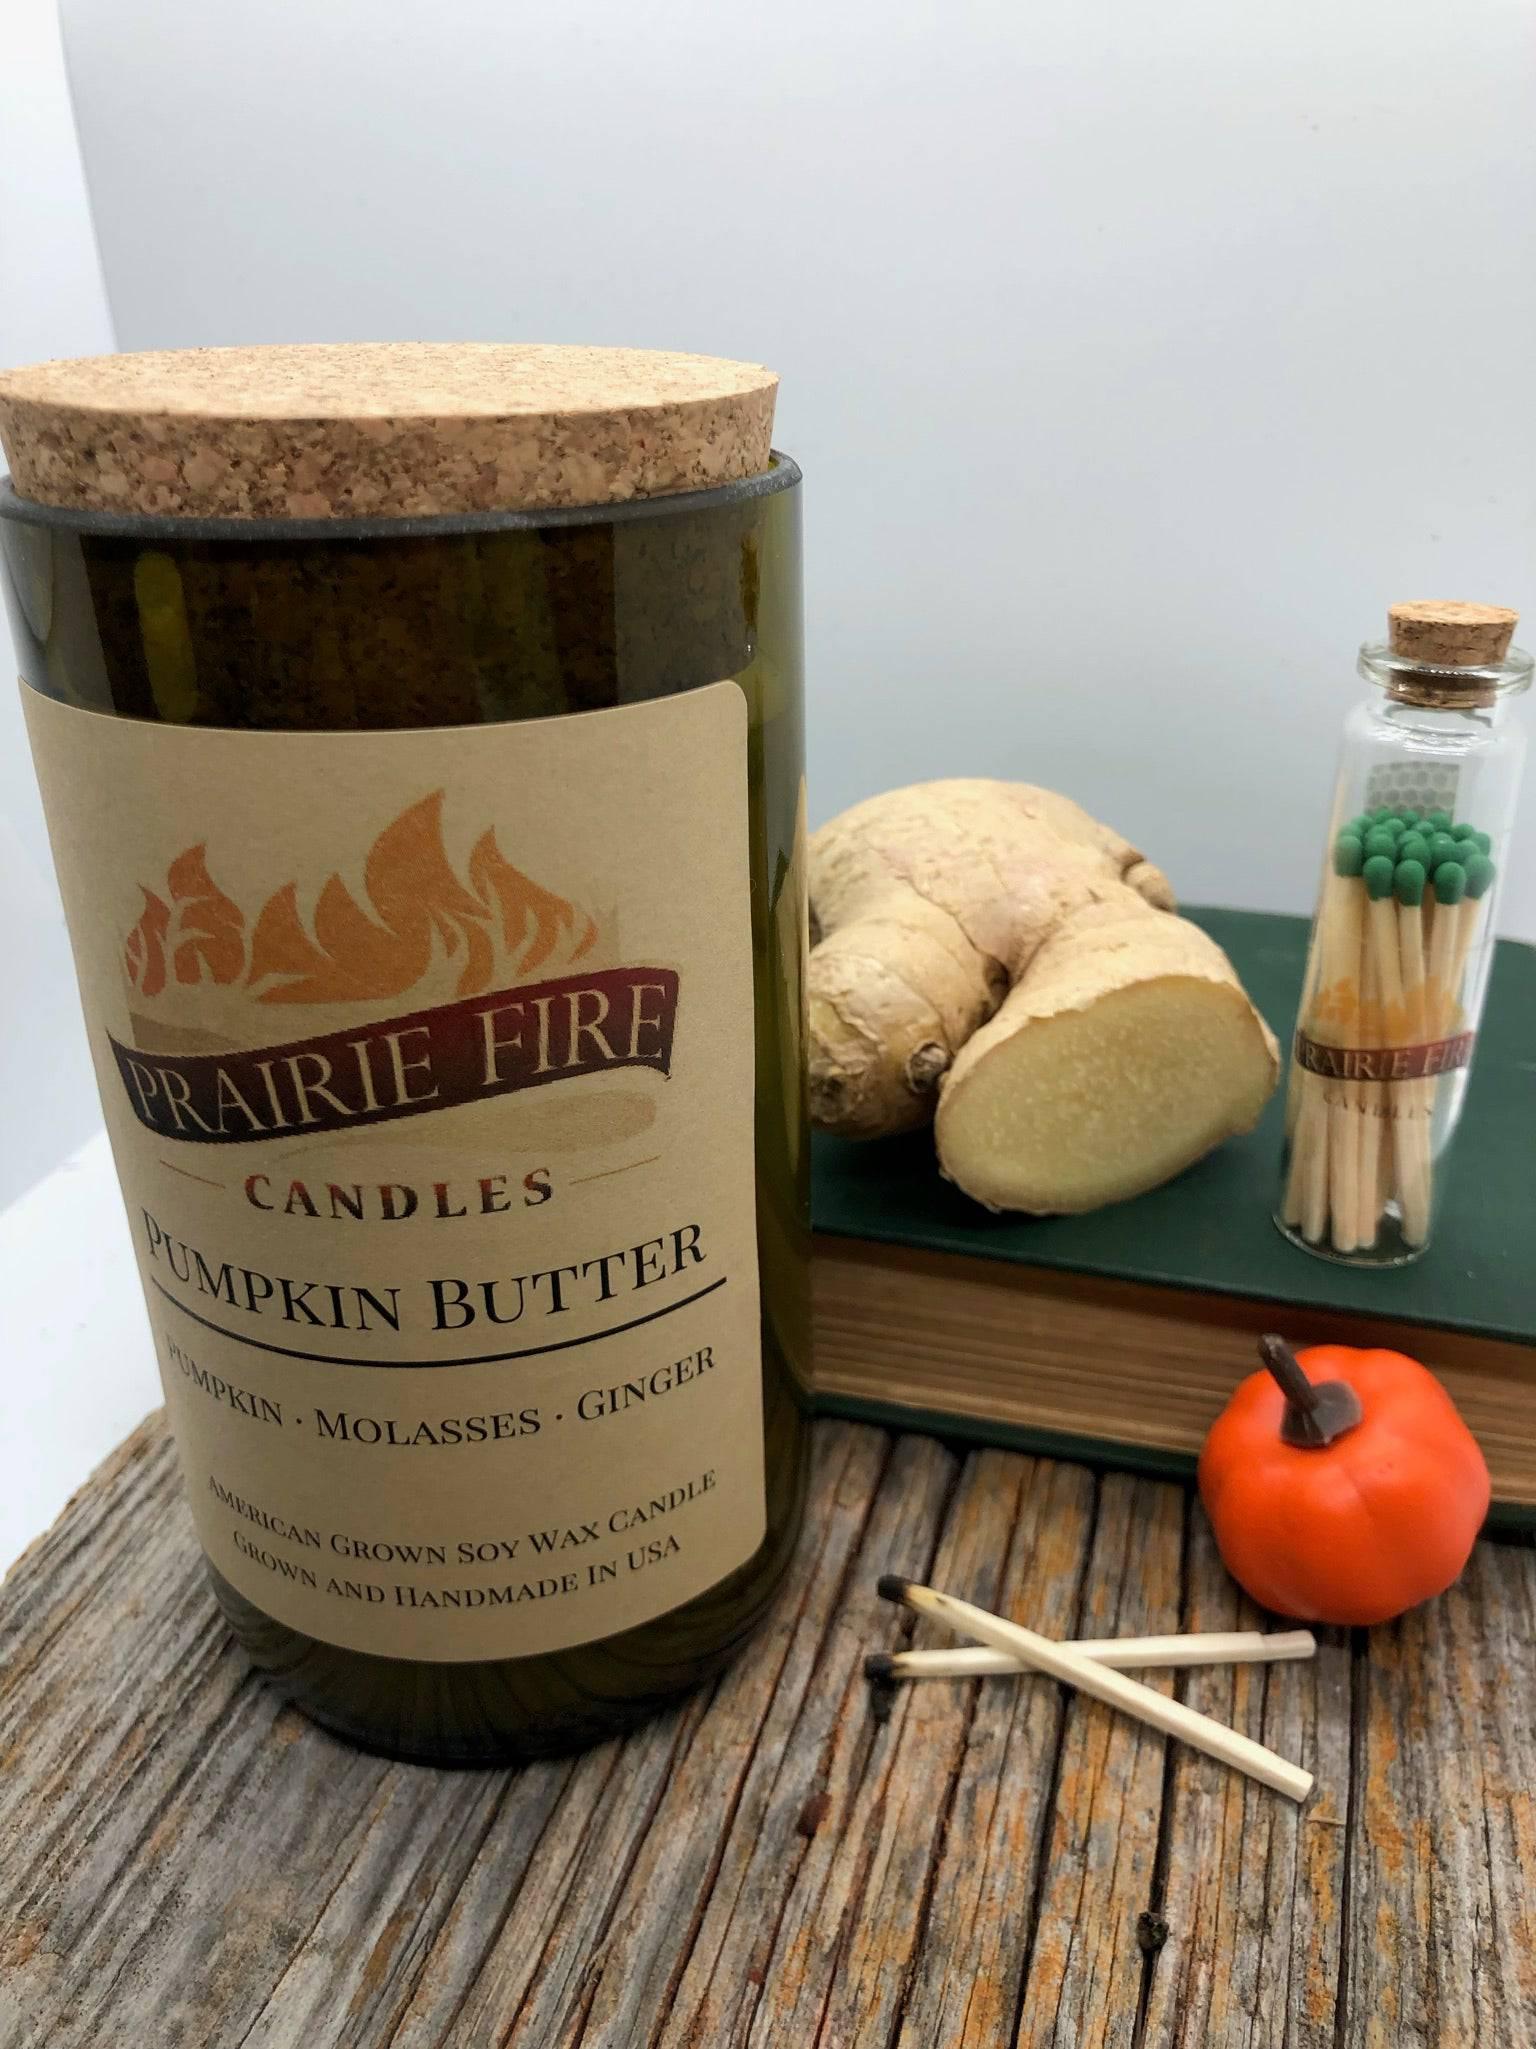 Pumpkin Butter Soy Wax Candle | Repurposed Wine Bottle Candle Natural Cork | Handmade in USA Candle | Eco-Friendly Candle | Non-Toxic Soy Candle - Prairie Fire Candles